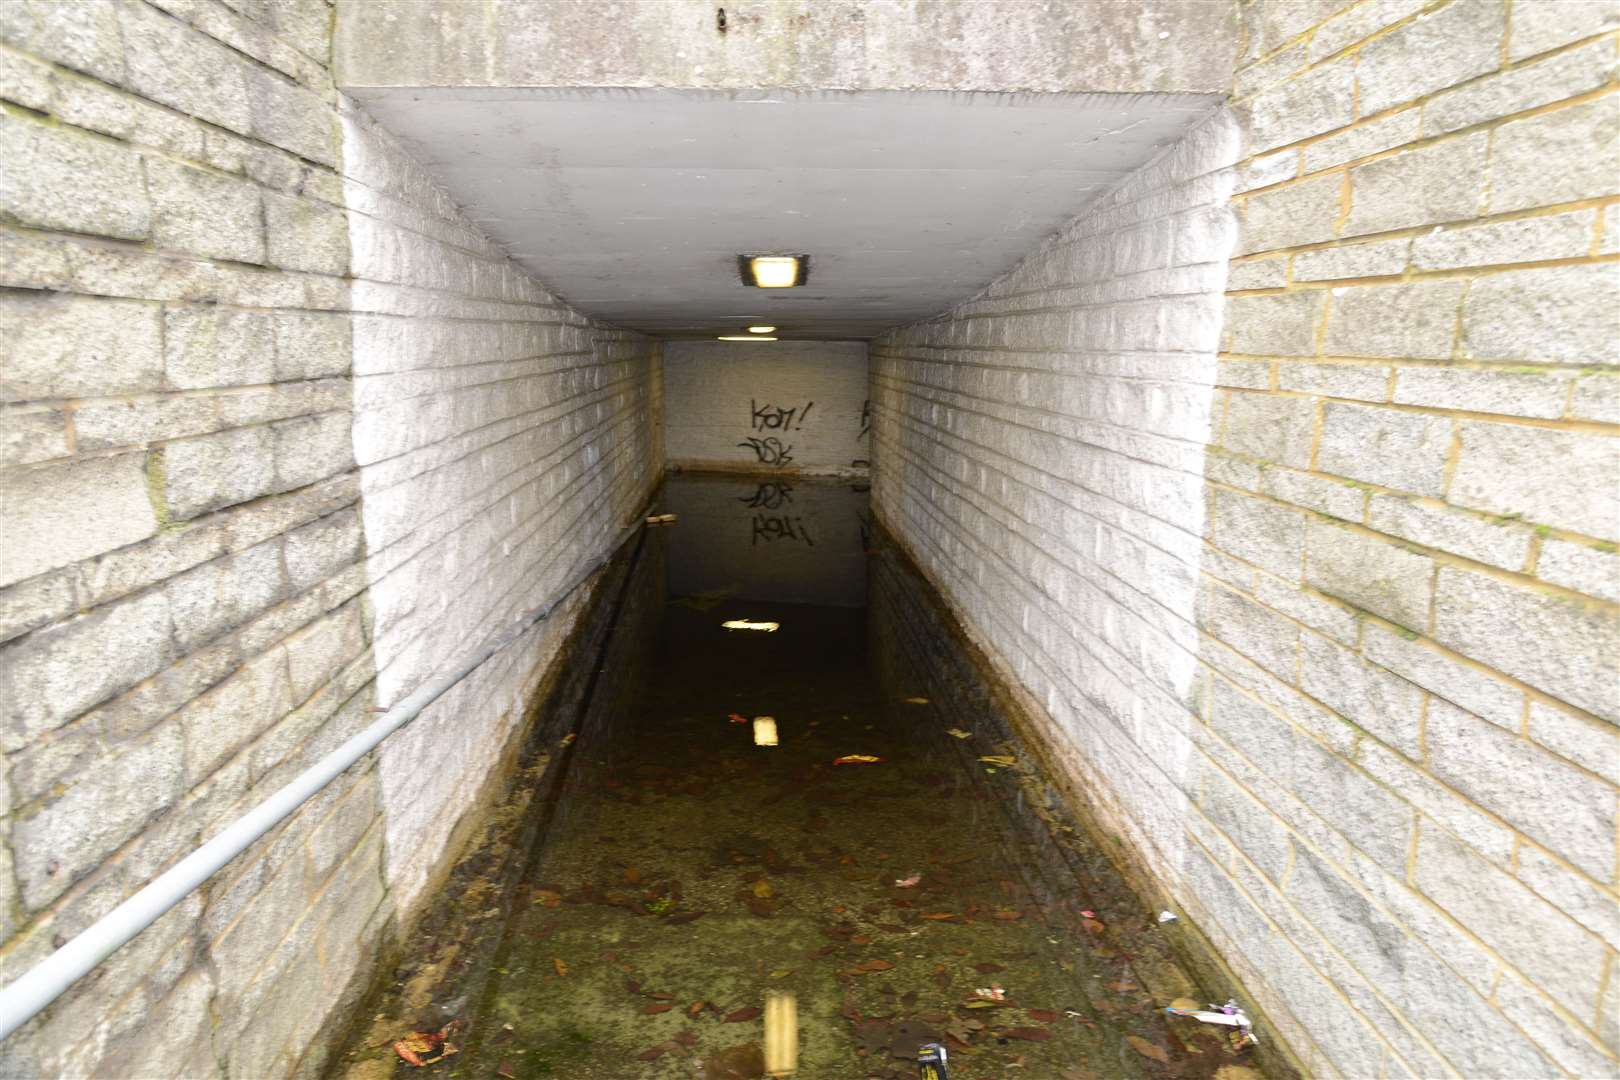 Mace Lane underpass was closed following a series of floods